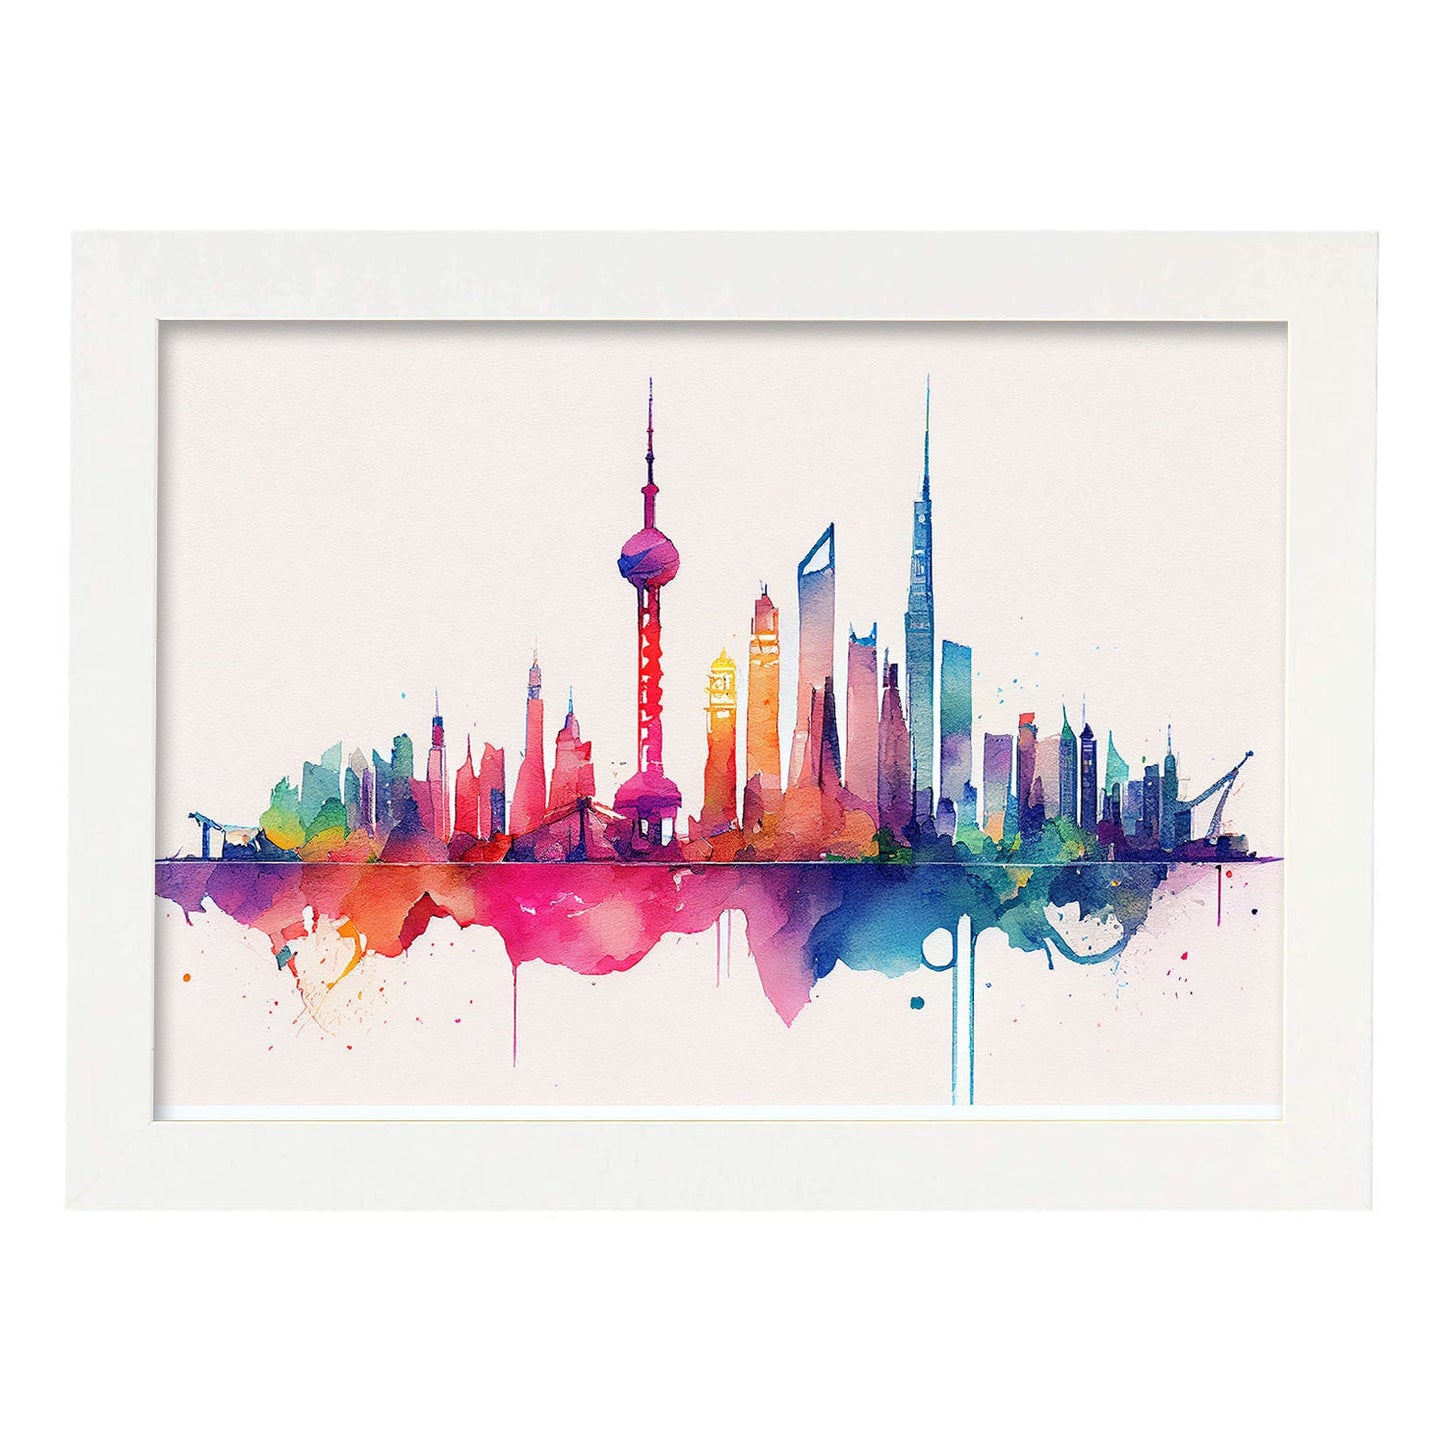 Nacnic watercolor of a skyline of the city of Shanghai_5. Aesthetic Wall Art Prints for Bedroom or Living Room Design.-Artwork-Nacnic-A4-Marco Blanco-Nacnic Estudio SL